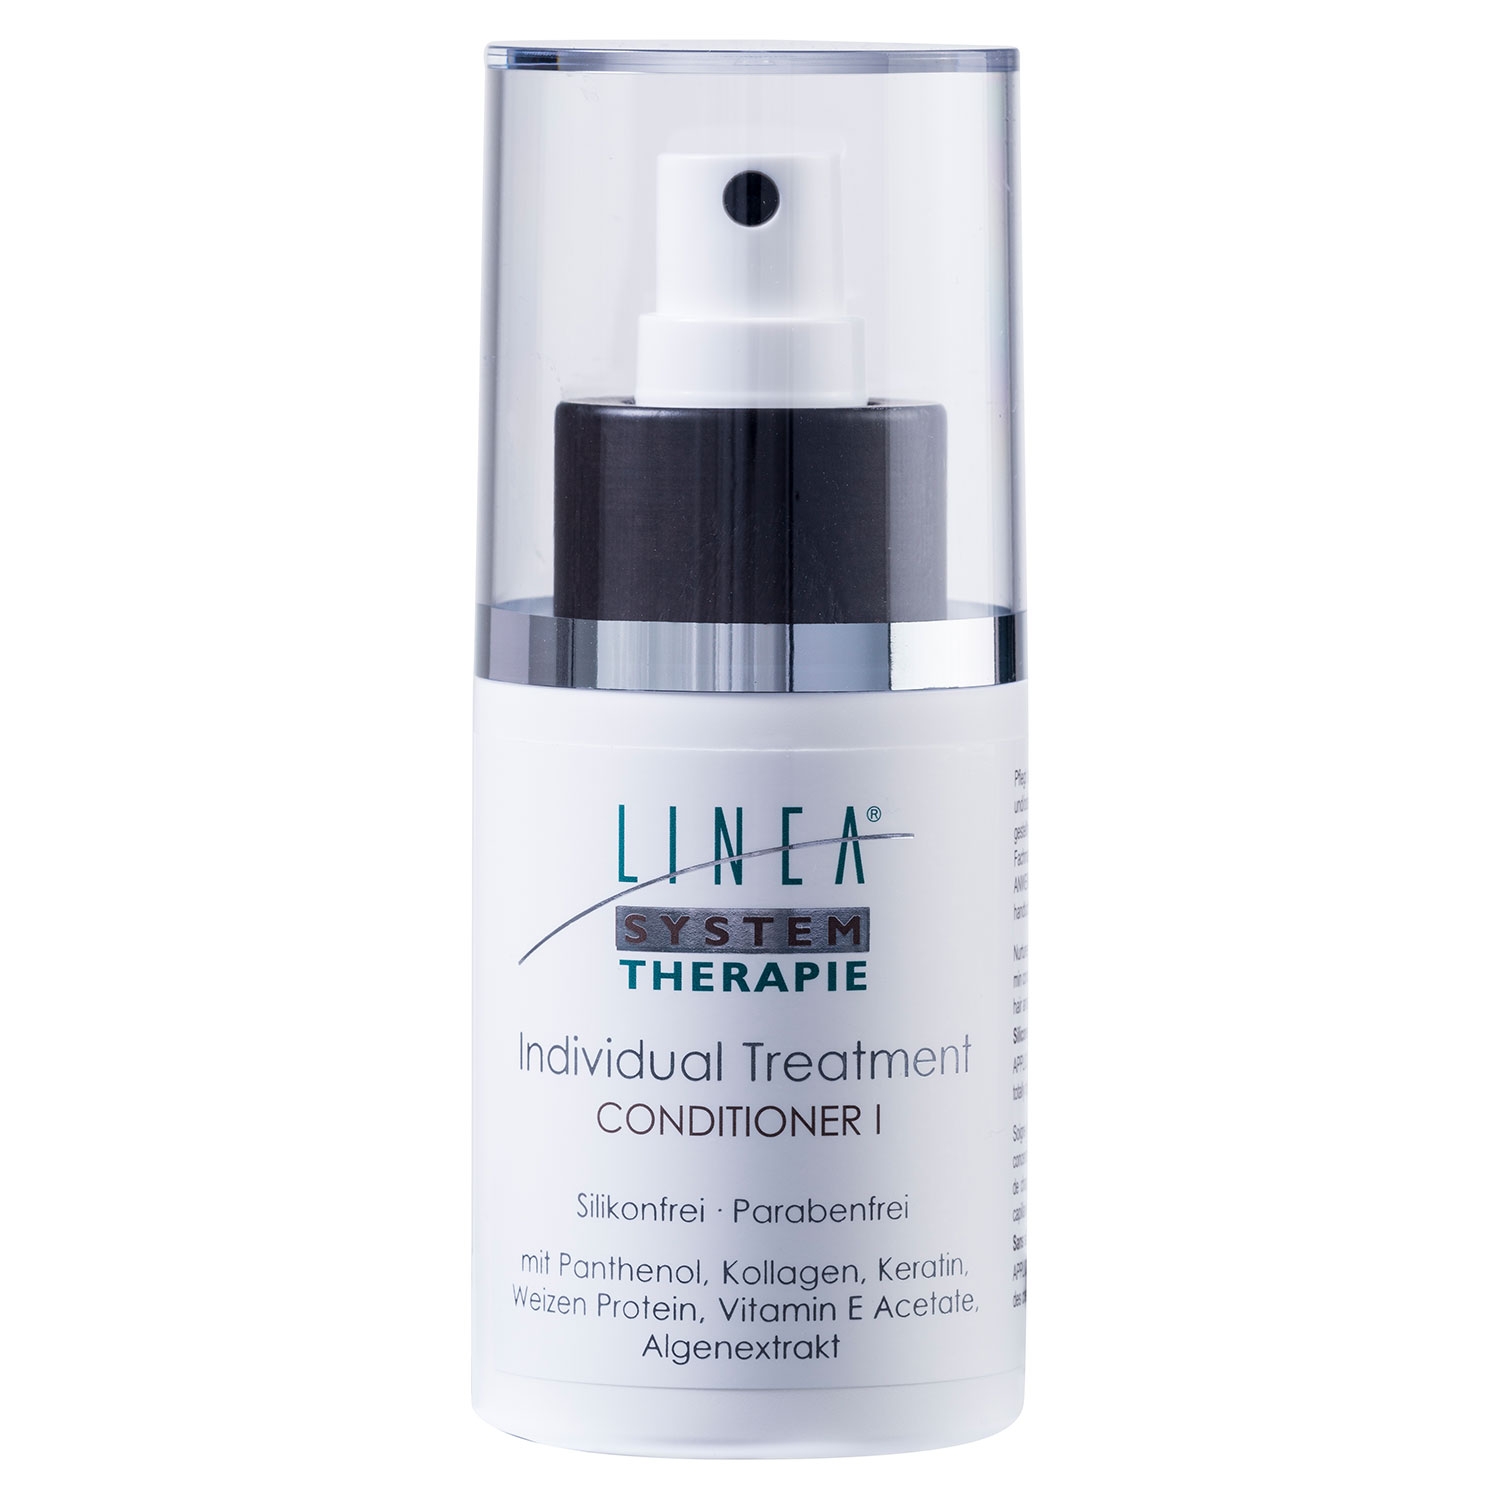 Product image from Linea - Individual Treatment Conditioner